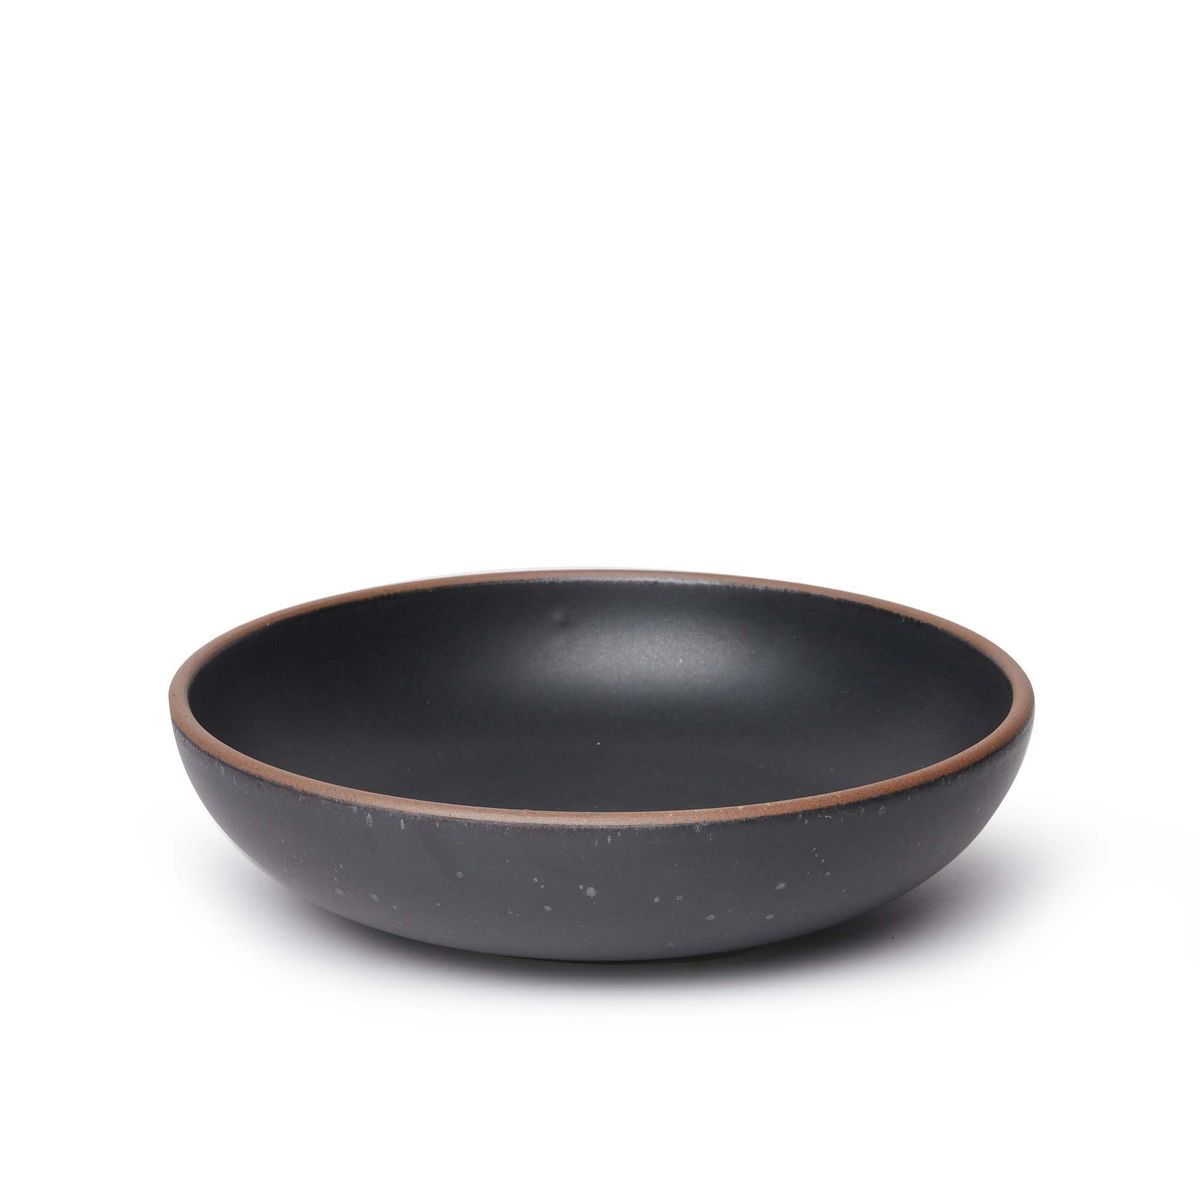 A large shallow serving ceramic bowl in a graphite black color featuring iron speckles and an unglazed rim